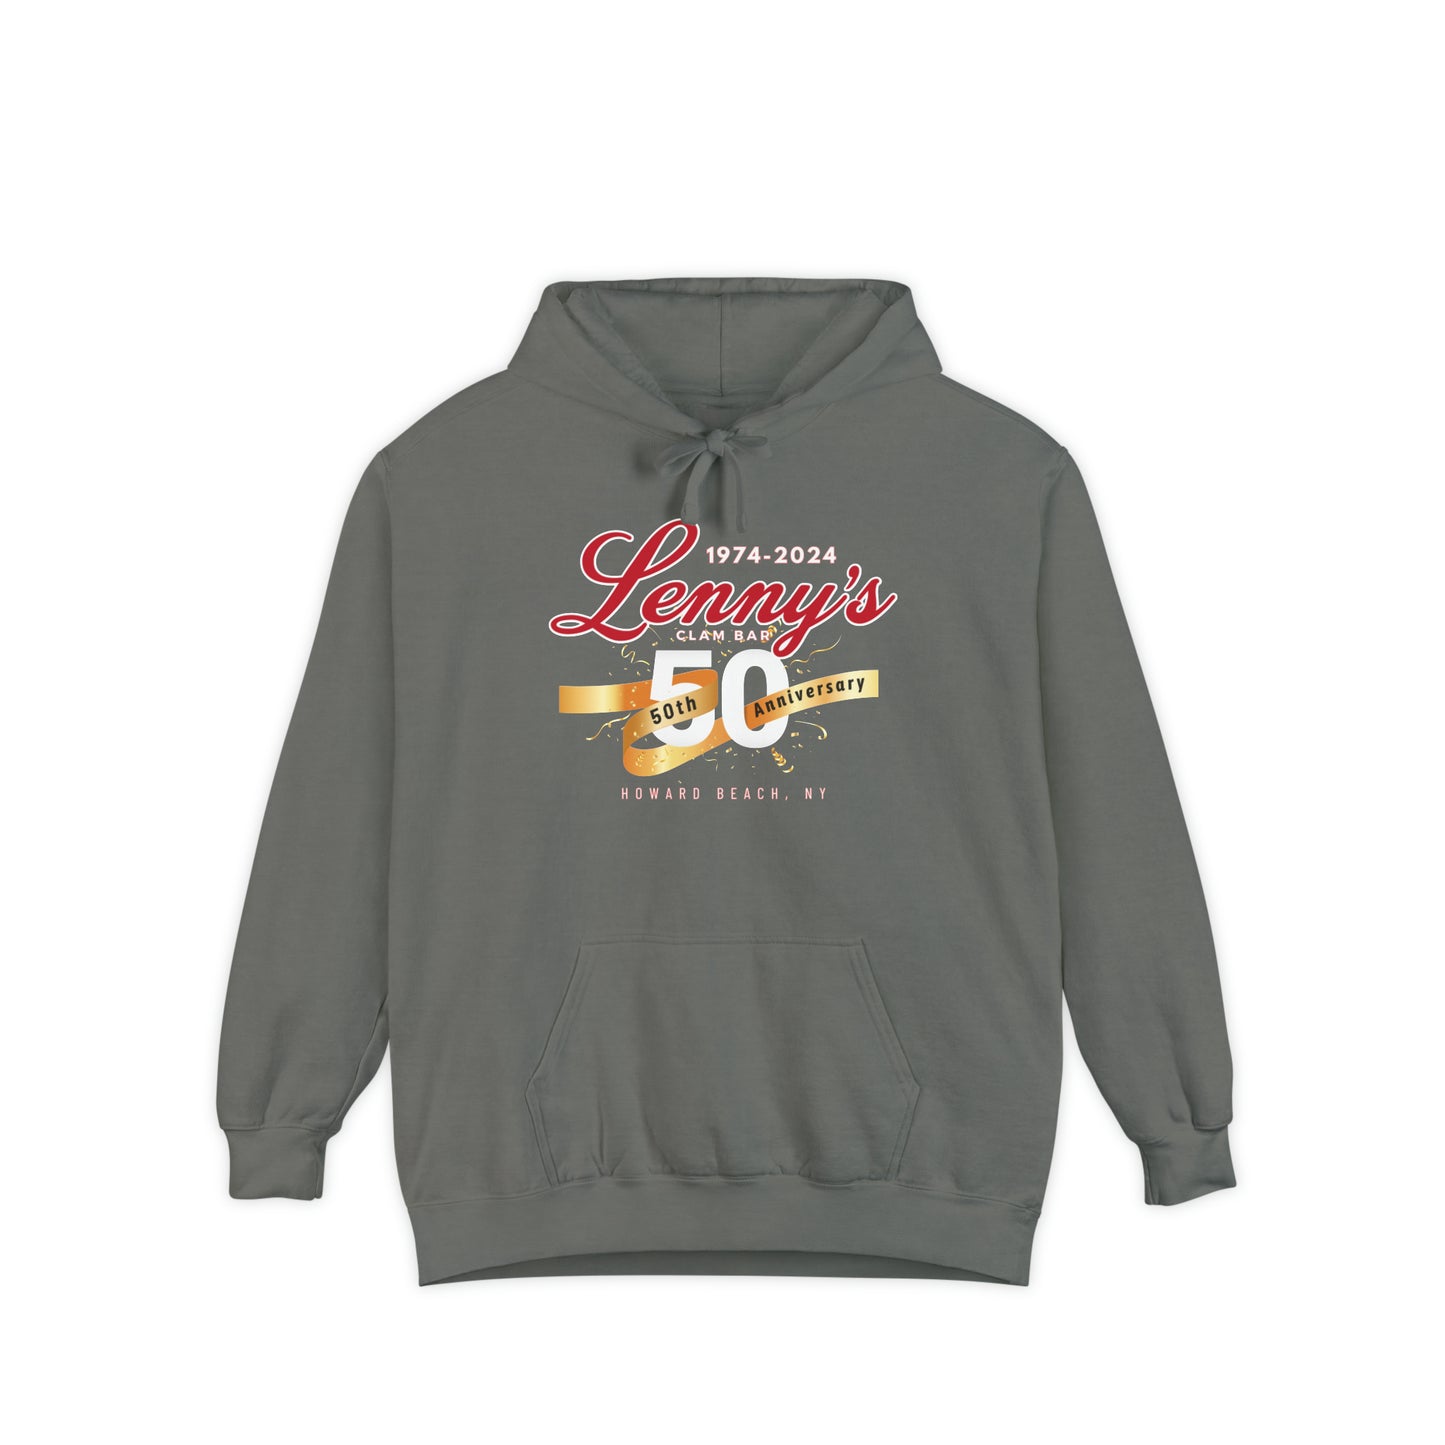 Lenny's 50th Anniversary Commemorative Heavyweight Garment-Dyed Hoodie